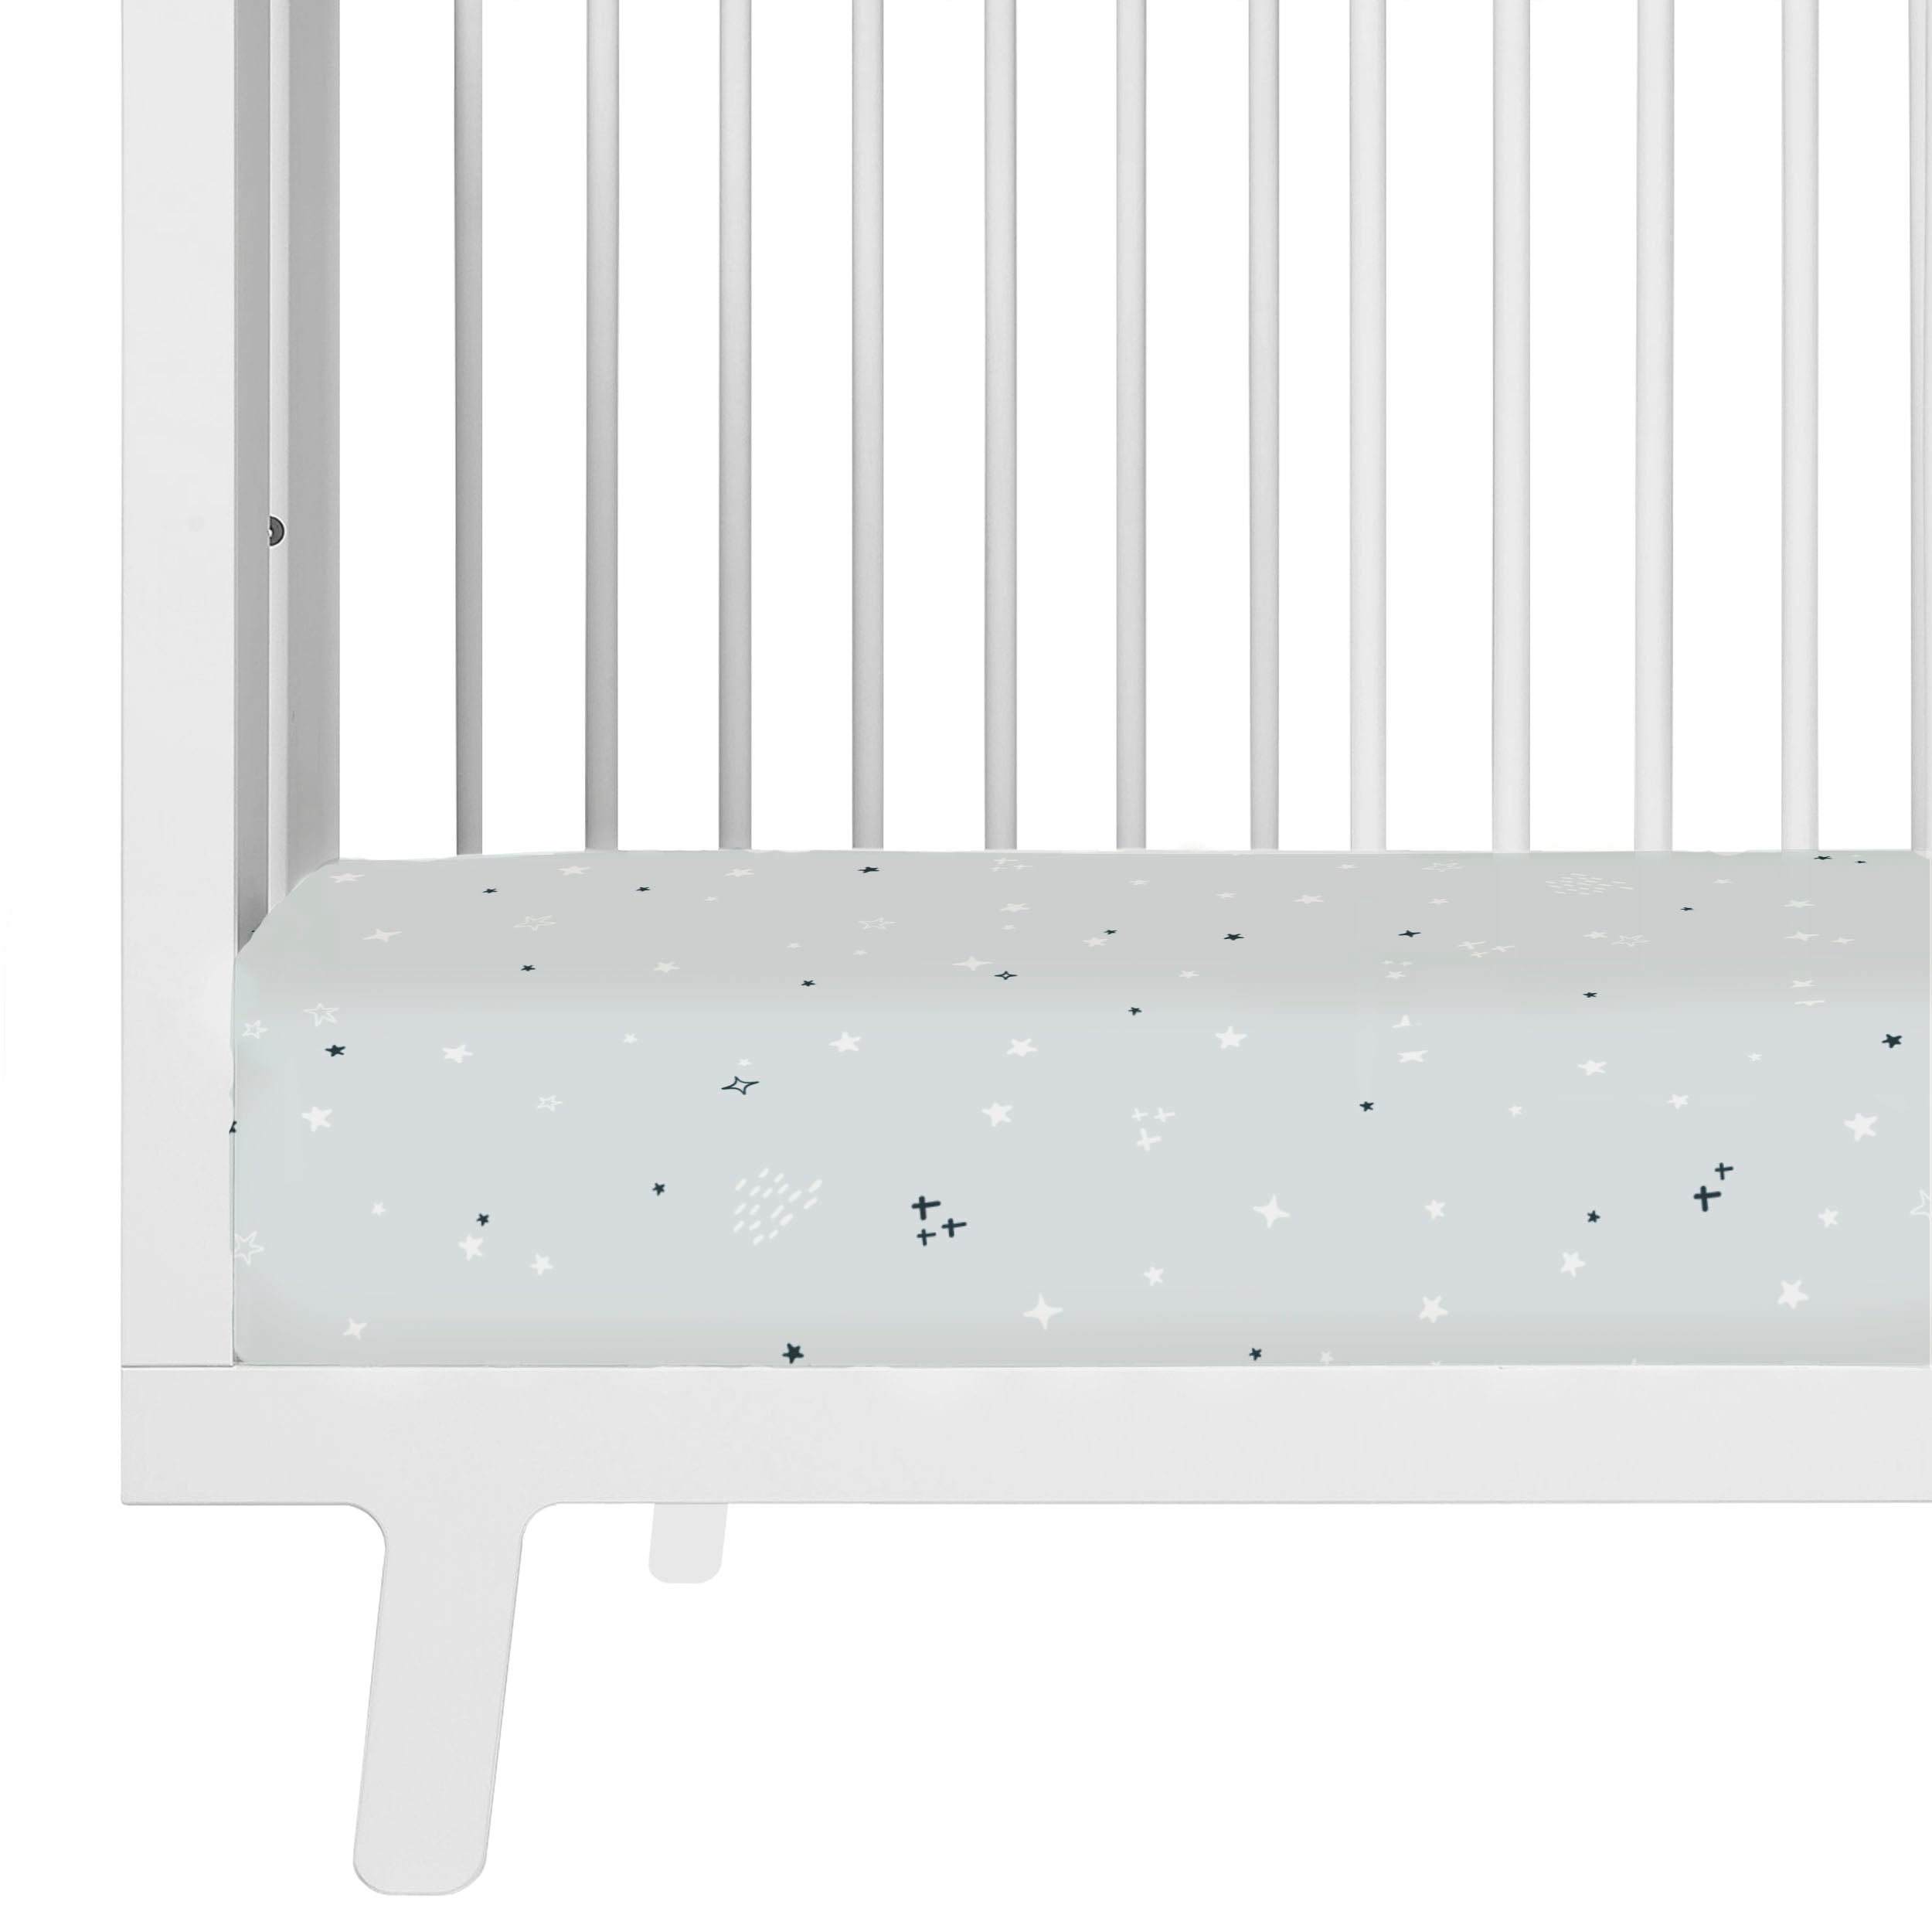 A close-up view of a white baby crib with a mattress covered in a Crib Fitted Sheet with Pillowcase - Milky Way adorned with a pattern of stars and small shapes from Makemake Organics.